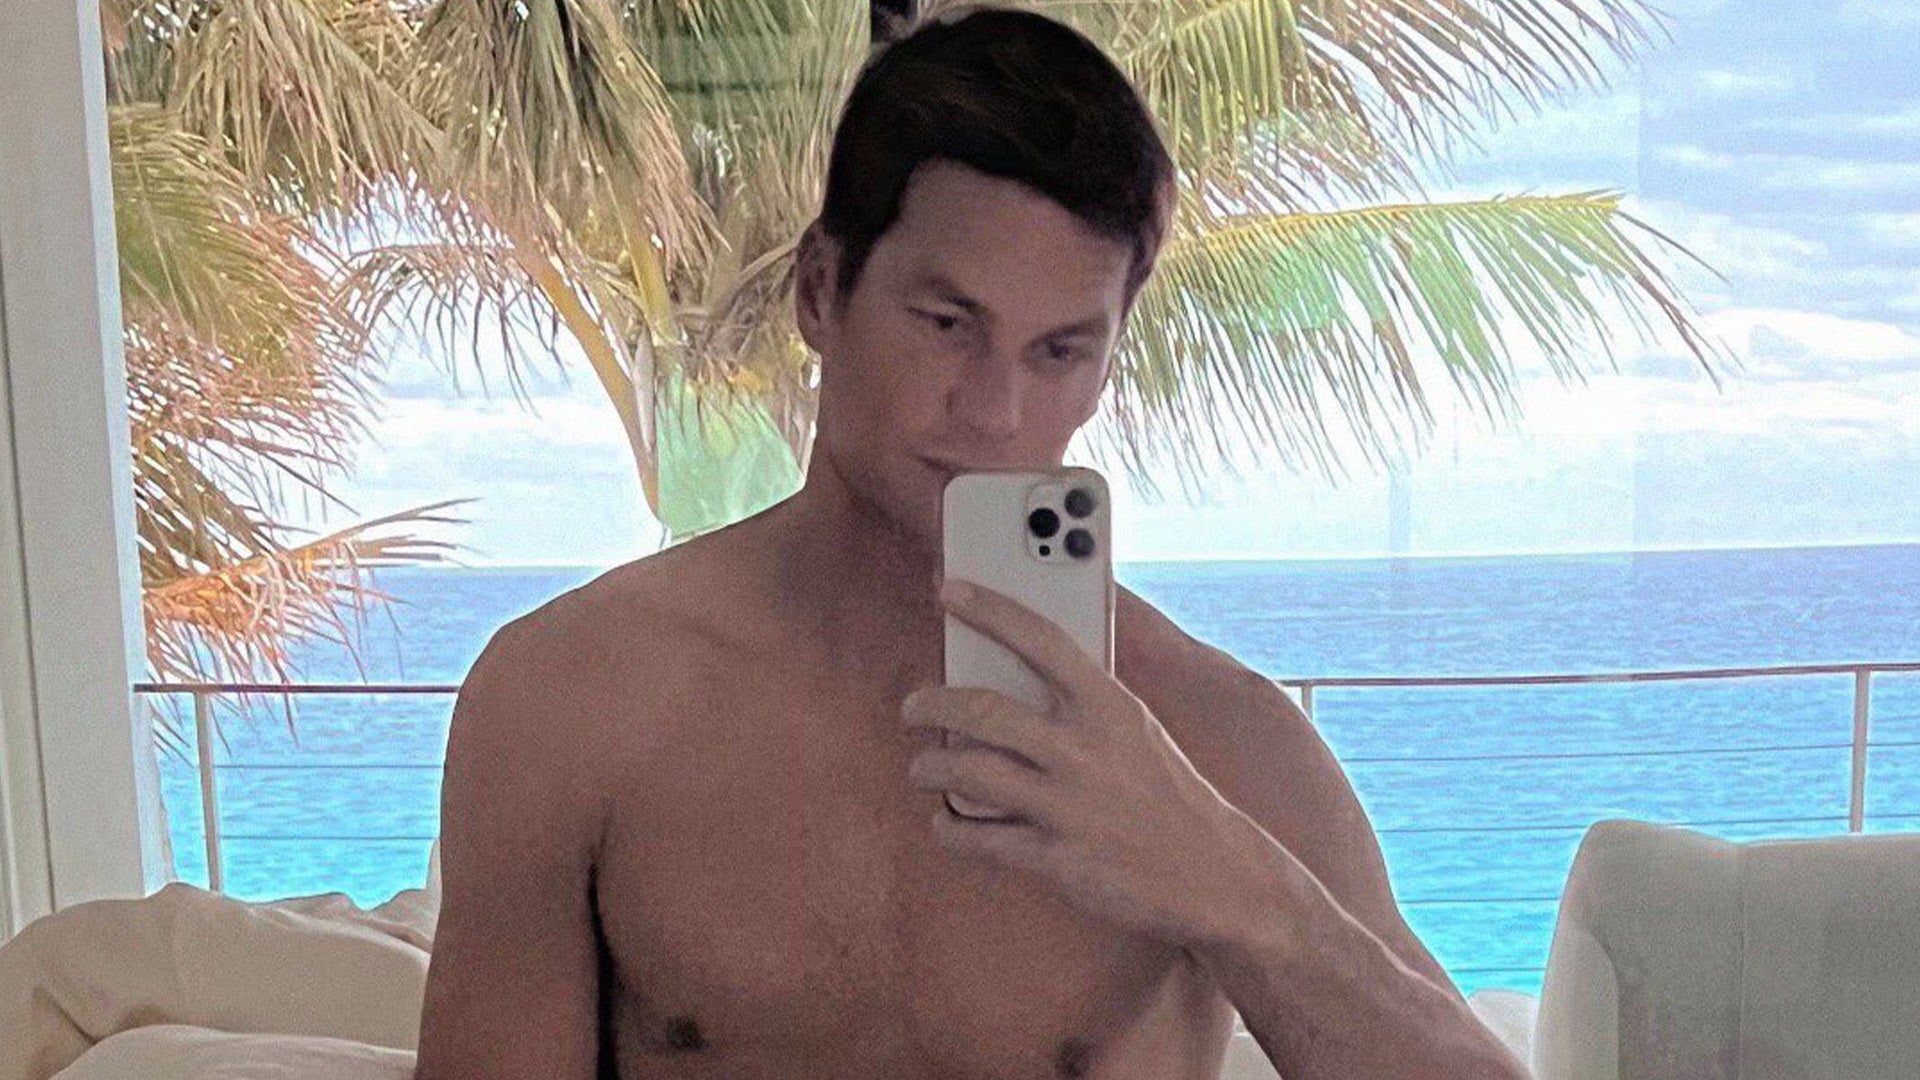 Newly Single Tom Brady Posts Thirst Trap Selfie in His Underwear Did I Do It Right? Entertainment Tonight pic